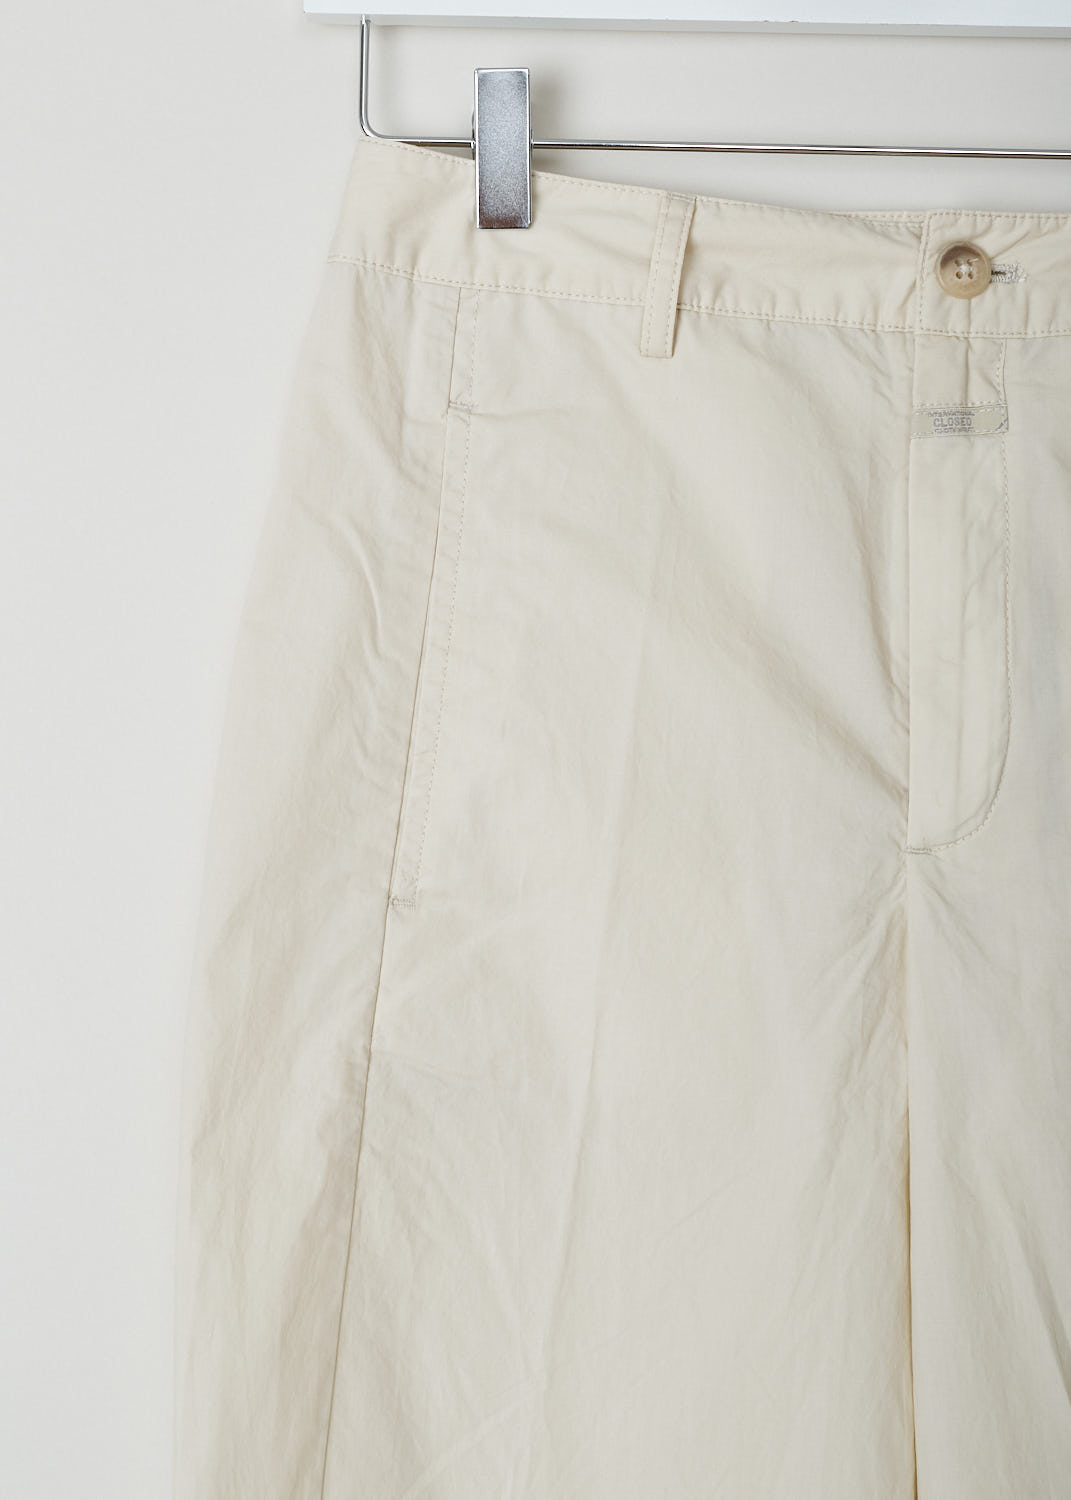 CLOSED, LIGHTWEIGHT BEIGE TROUSERS, LUDWIG_C9145_53A_22_259, Beige, Detail, These lightweight beige trousers feature a regular length, two forward slanted pockets on the front and two welt pockets on the back.